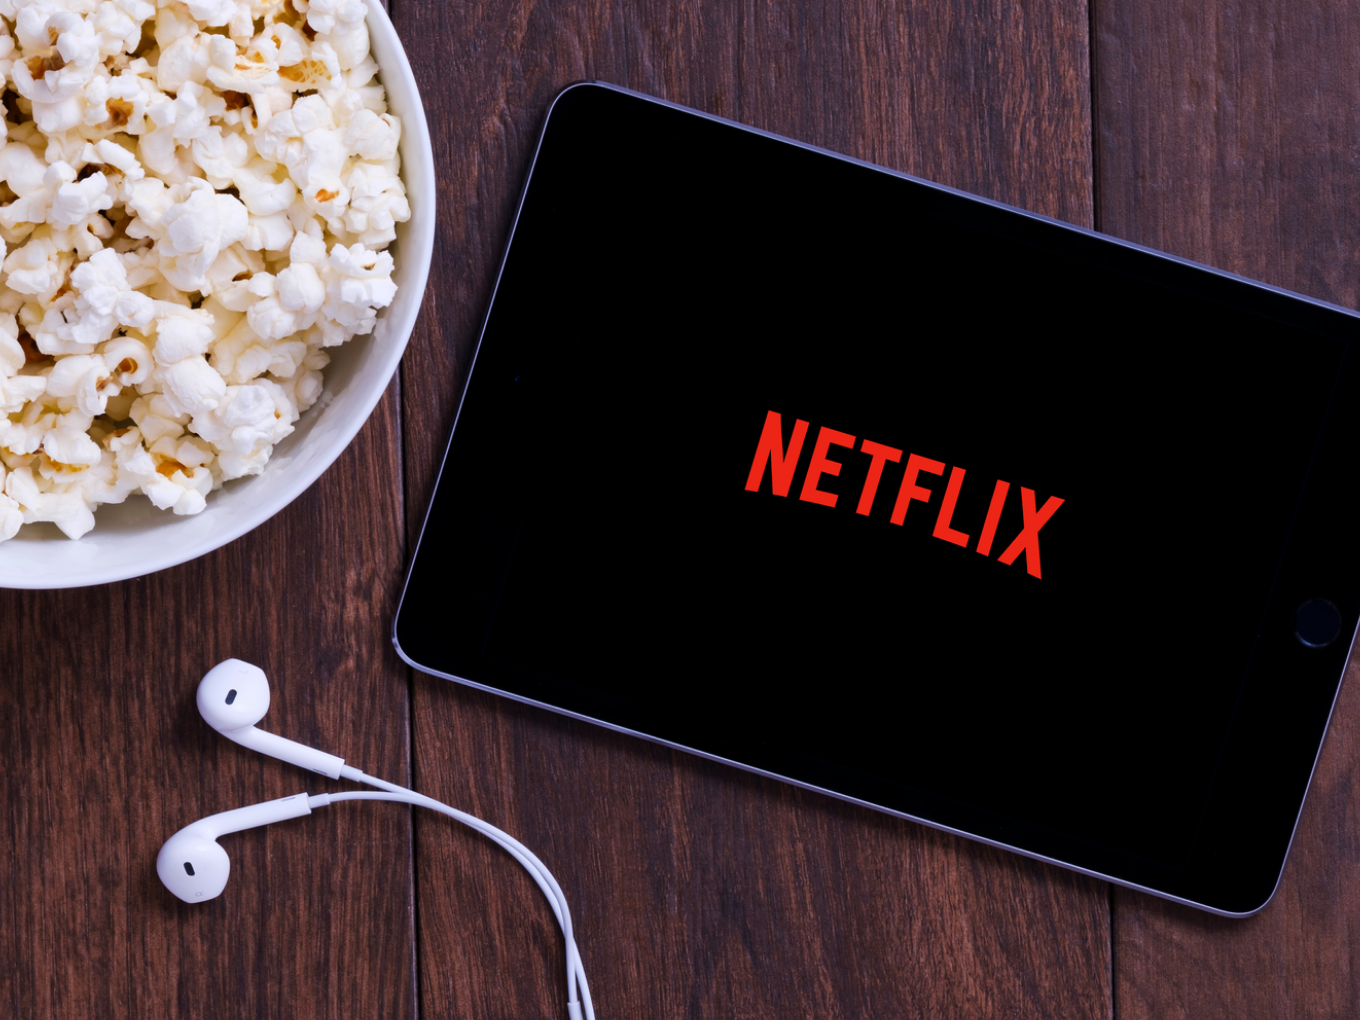 Netflix Improves User Engagement In India, Has Price Reduction Strategy Paid Off?